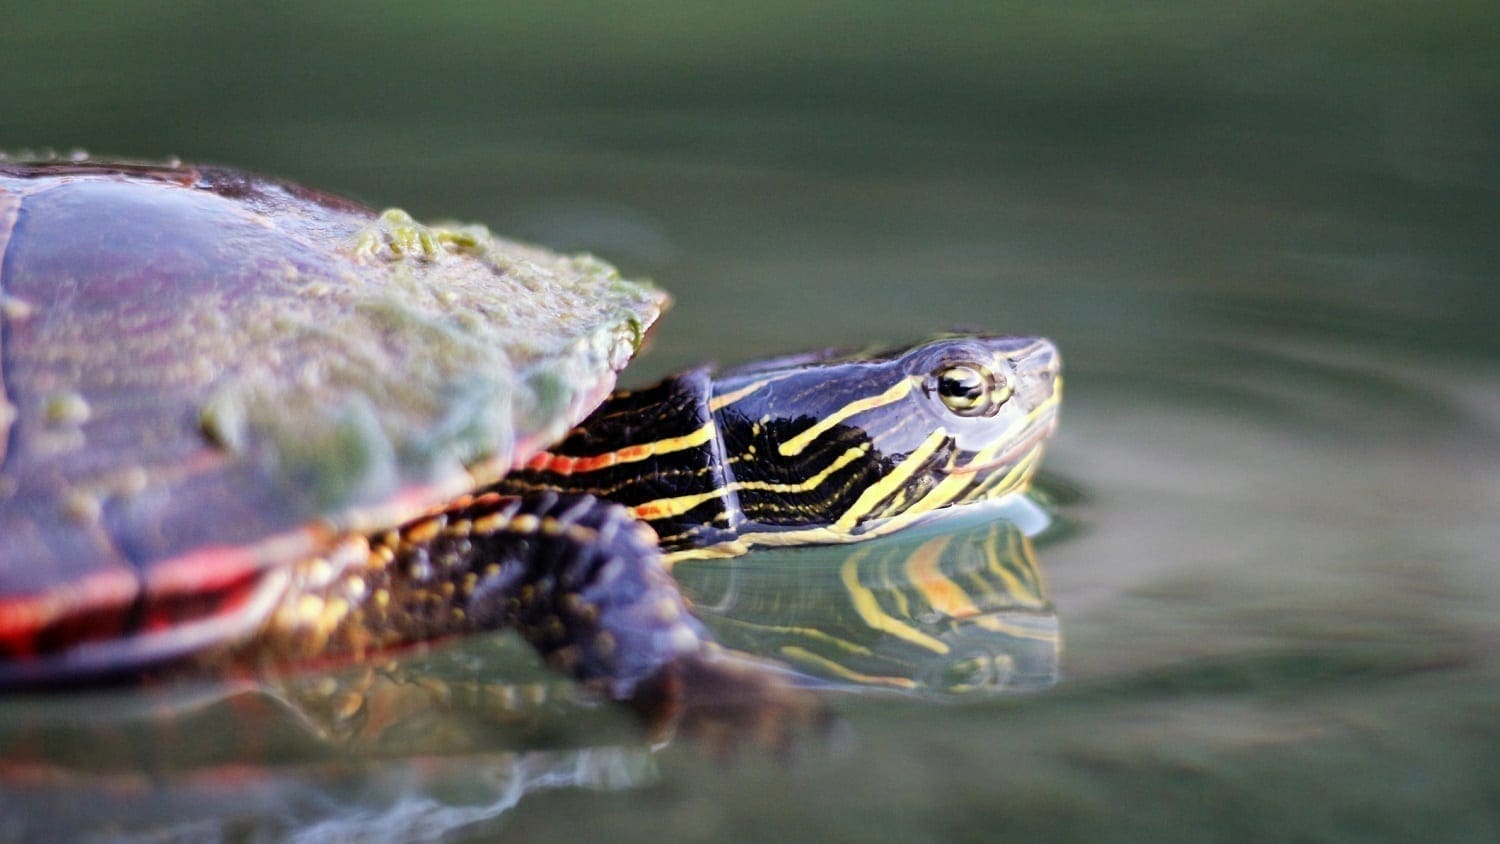 Painted turtle in water: Photo 106996742 © Isaac Mcevoy | Dreamstime.com